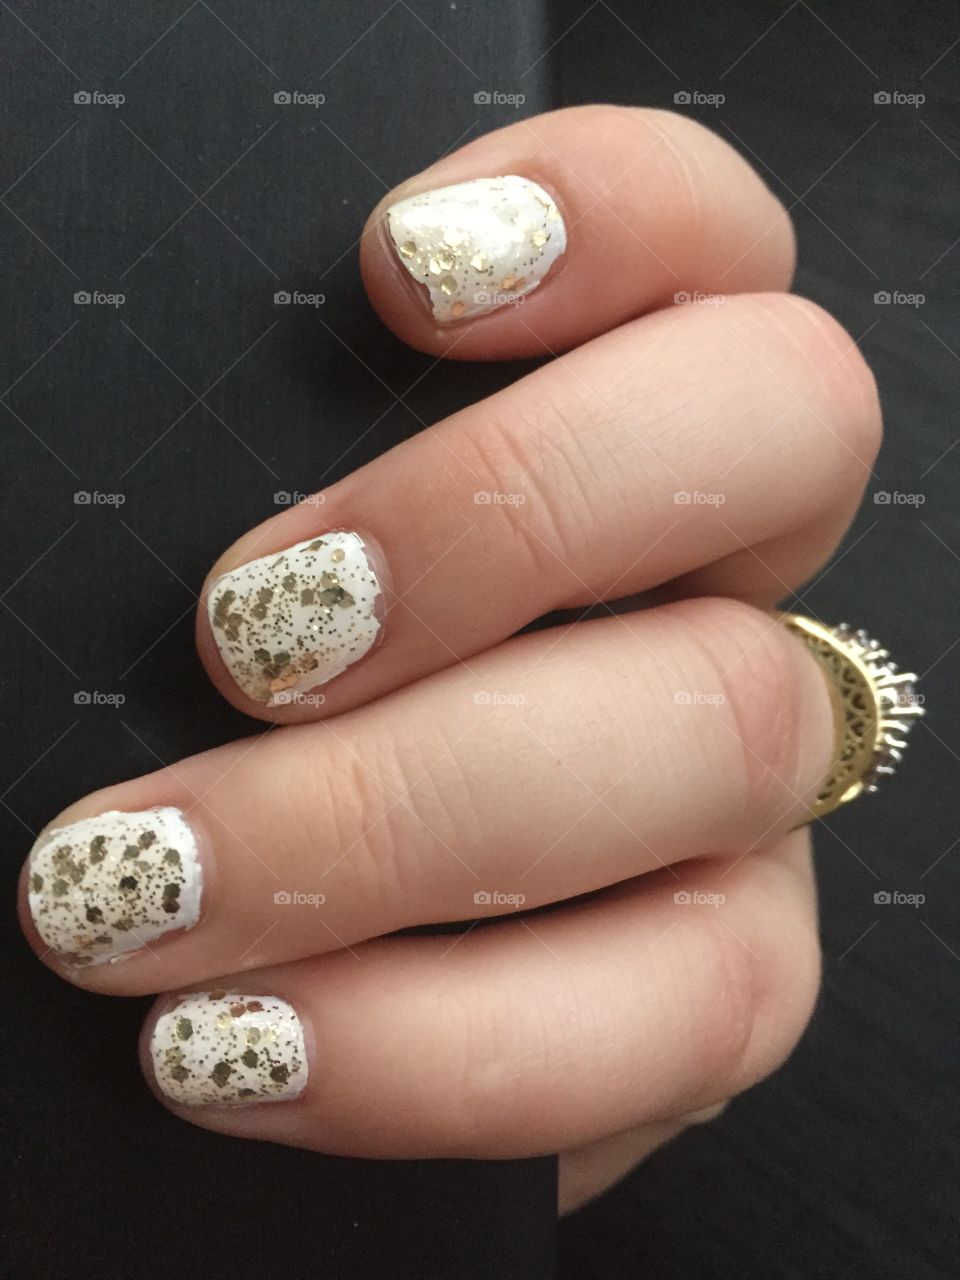 Engagement ring white and gold glitter nail art for bride to be